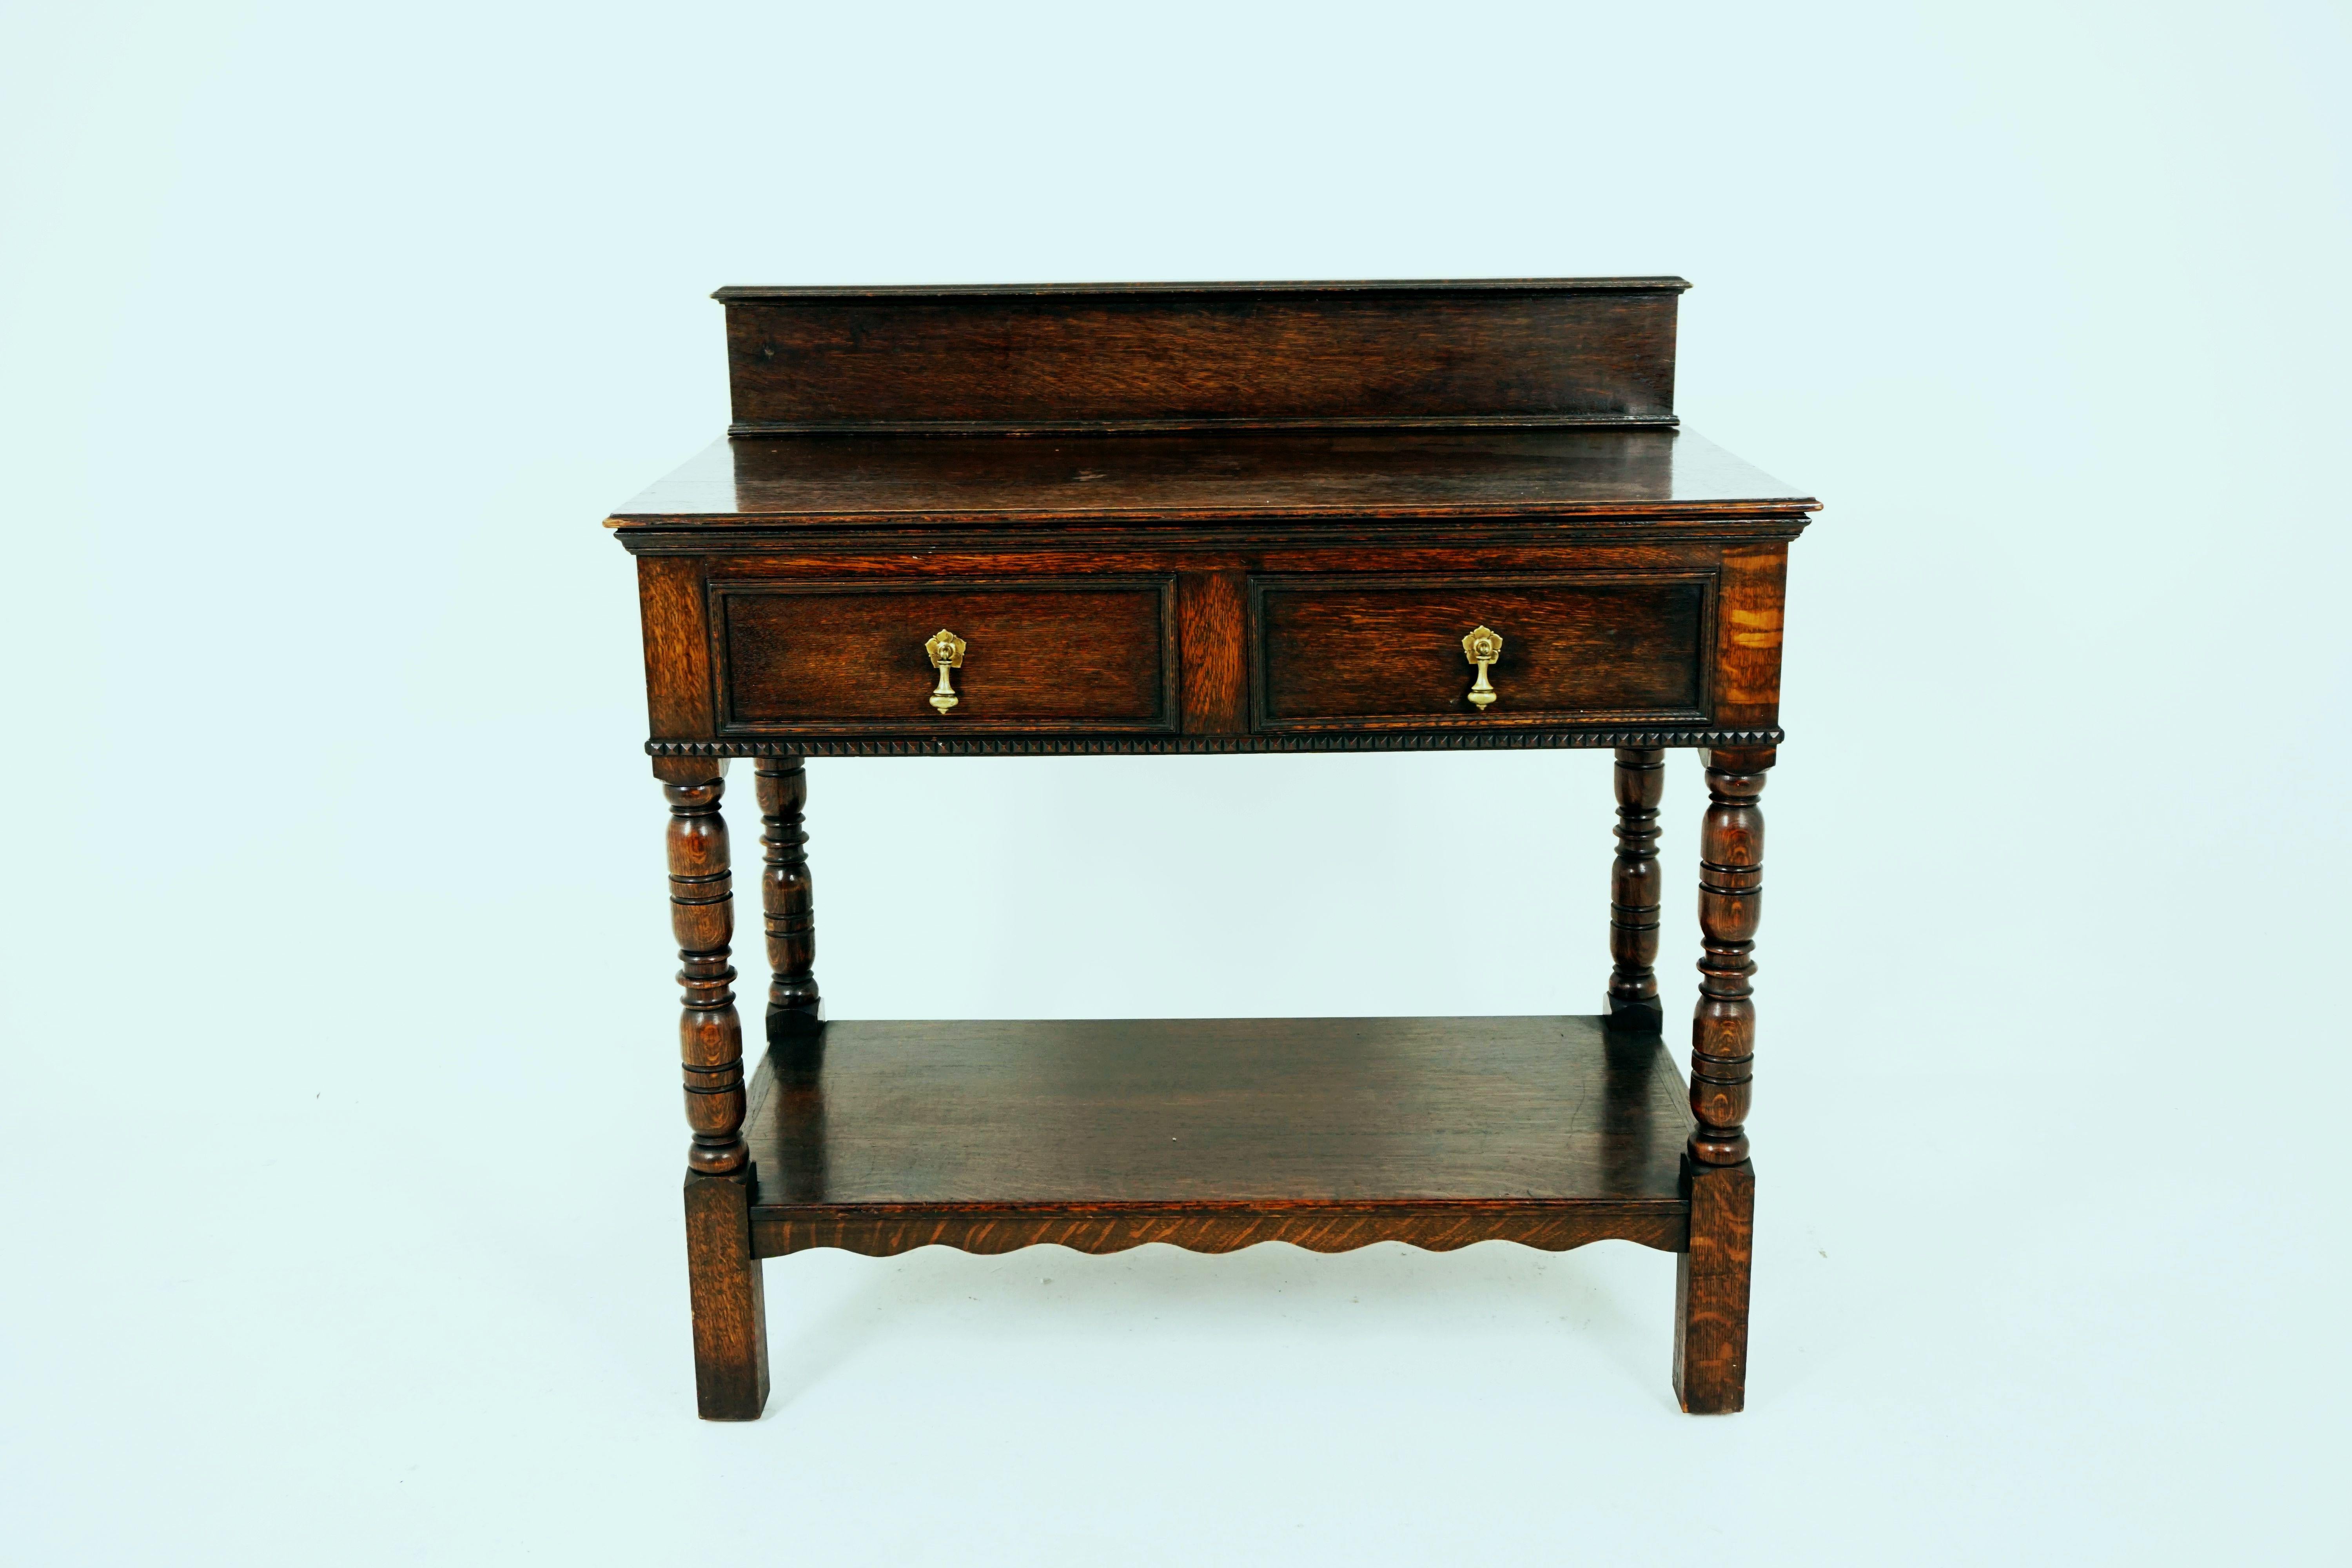 Antique hall table, tiger oak serving table, made by T. Justice & Sons in Dundee, Antique Furniture, Scotland 1910, B1835

Scotland, 1910
Solid oak construction
Original finish
Gallery back
Rectangular top
Pair of dovetailed drawers with